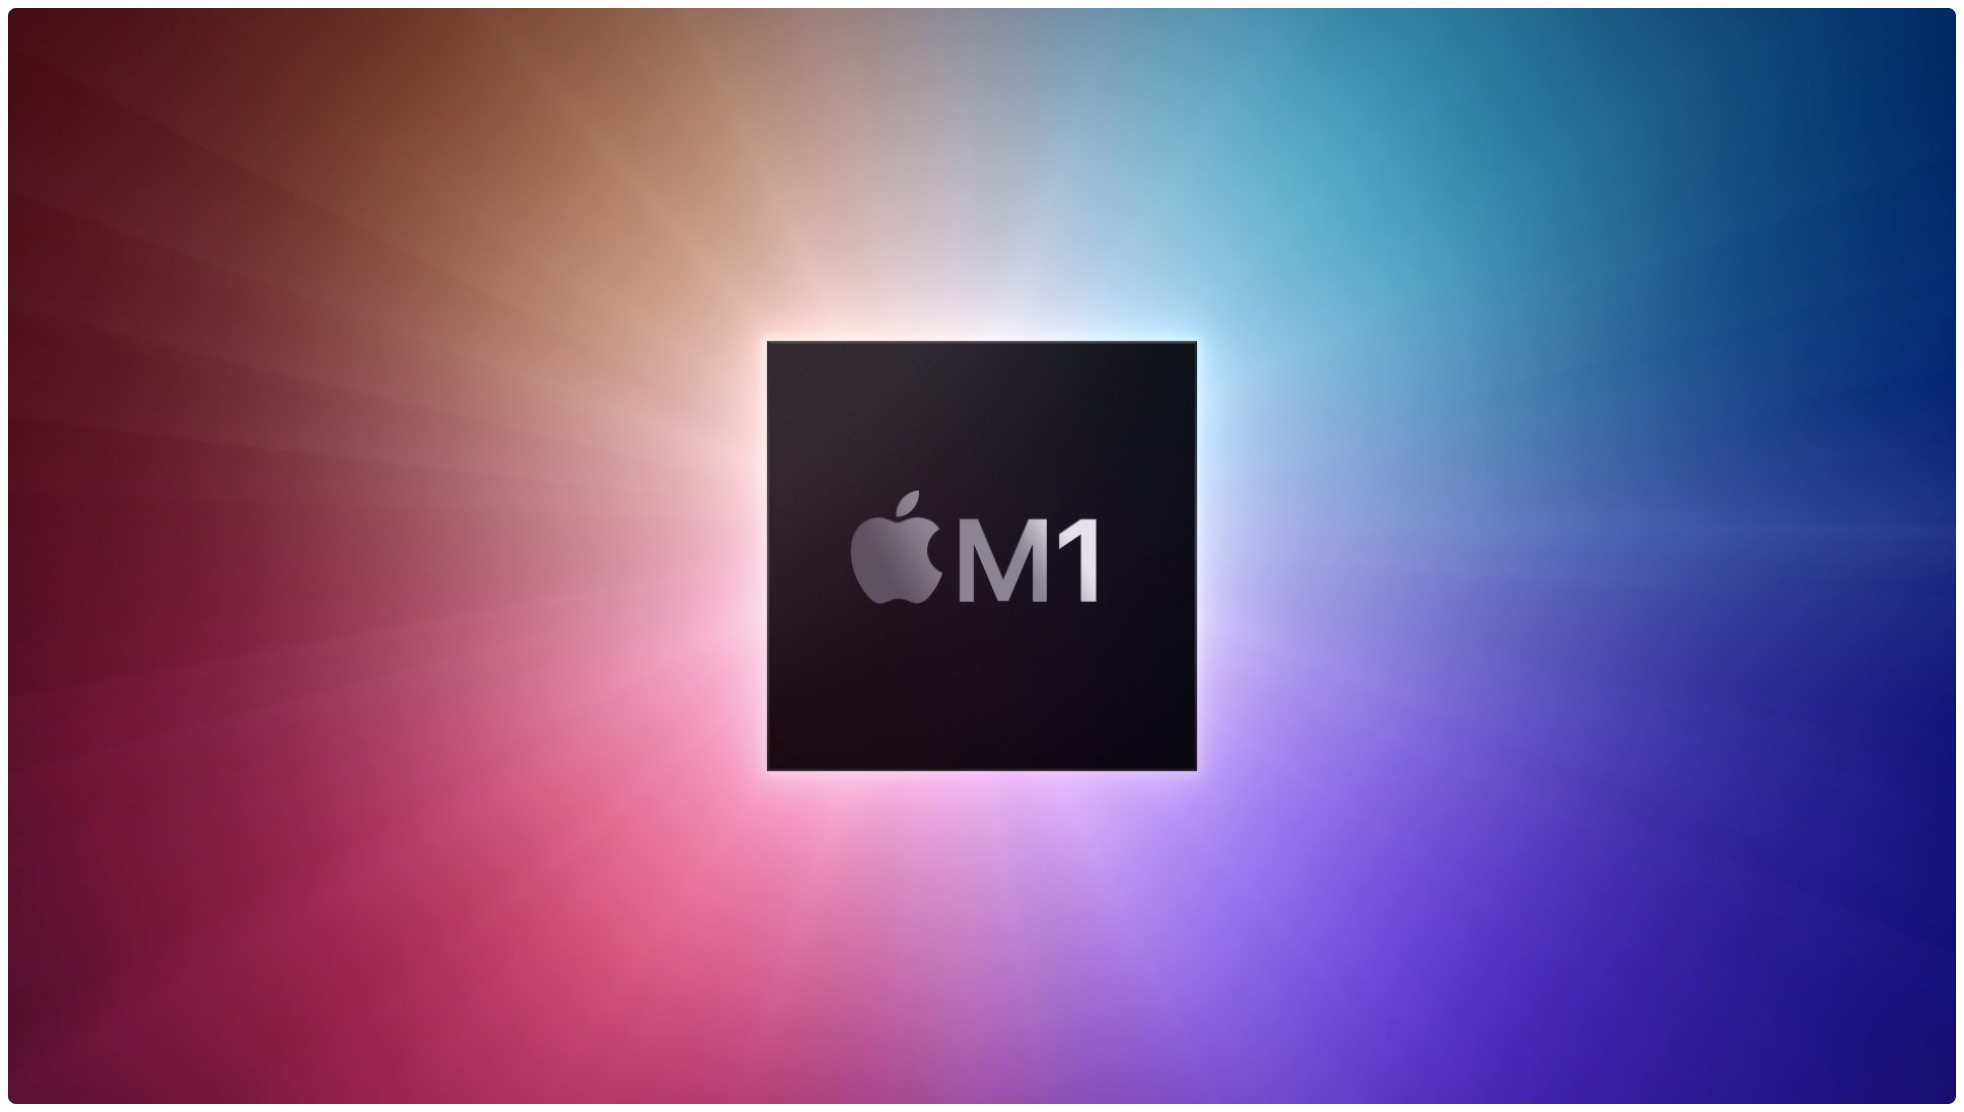 identify Apple silicon Macs - hero image showing the Apple M1 chip graphic